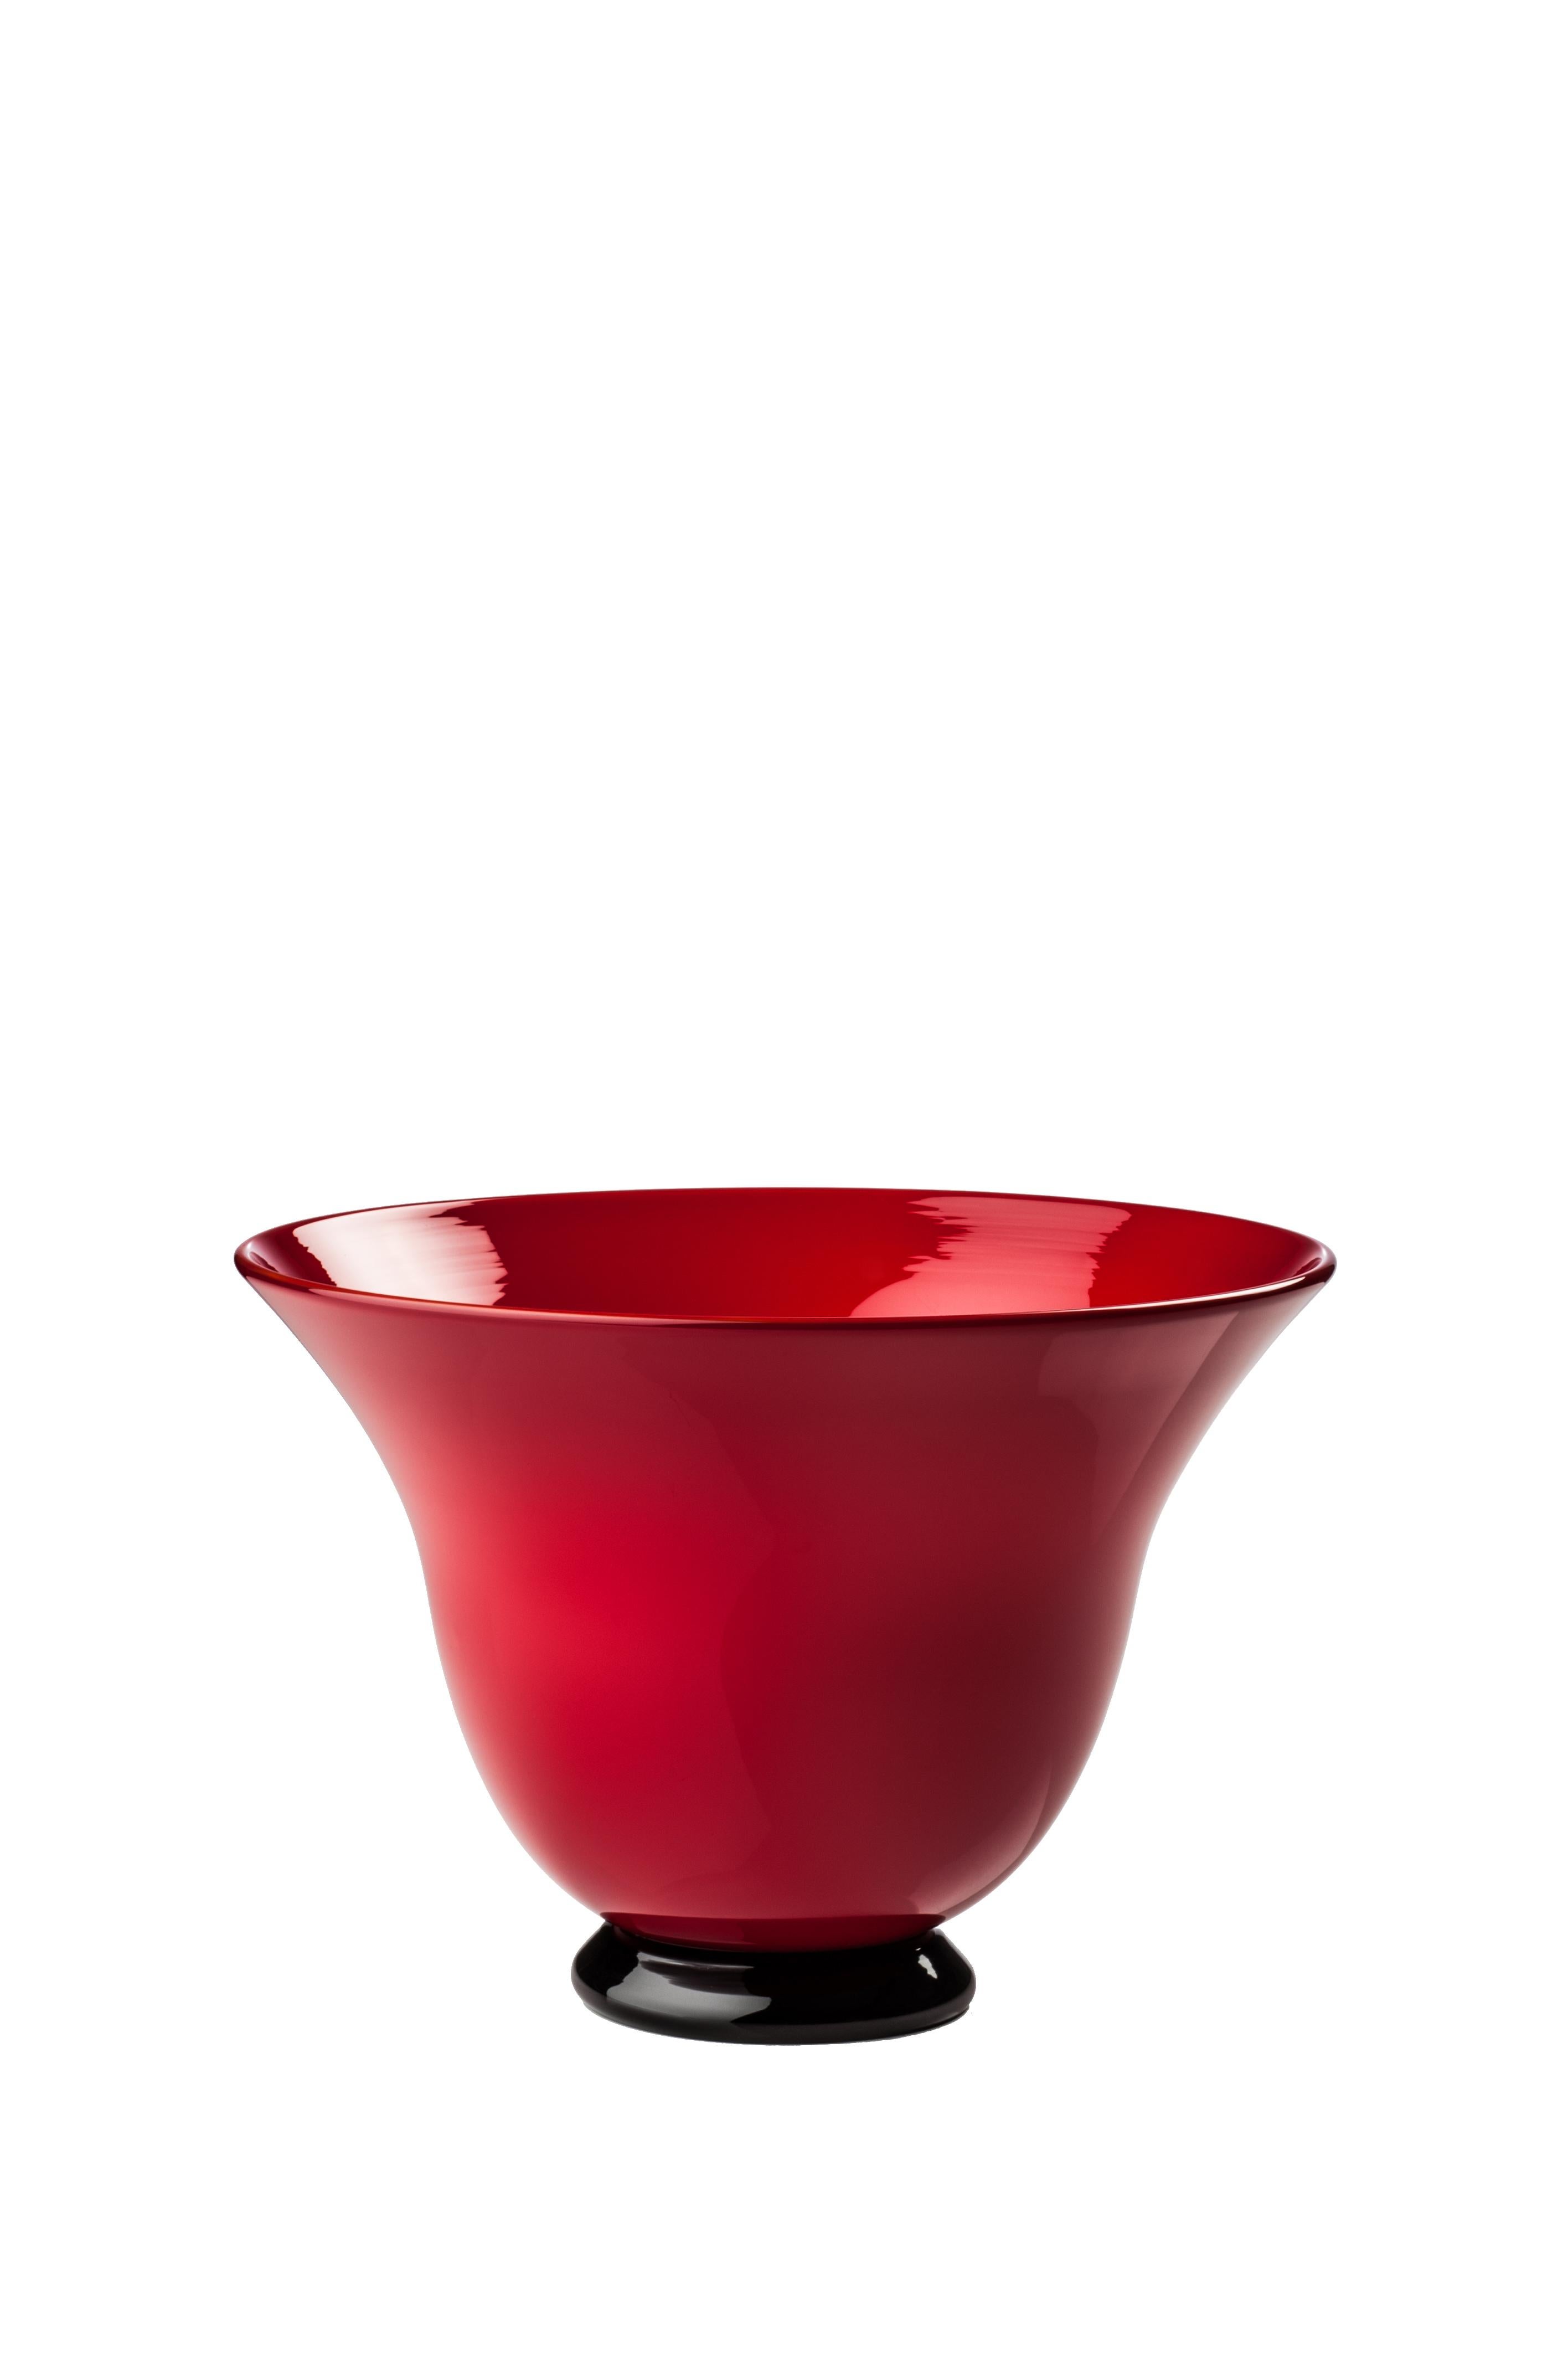 Venini glass bowl in red. Perfect for indoor home decor as container or statement piece for any room. Also available in other colors on 1stdibs. 

Dimensions: 25 cm diameter x 17.5 cm height.